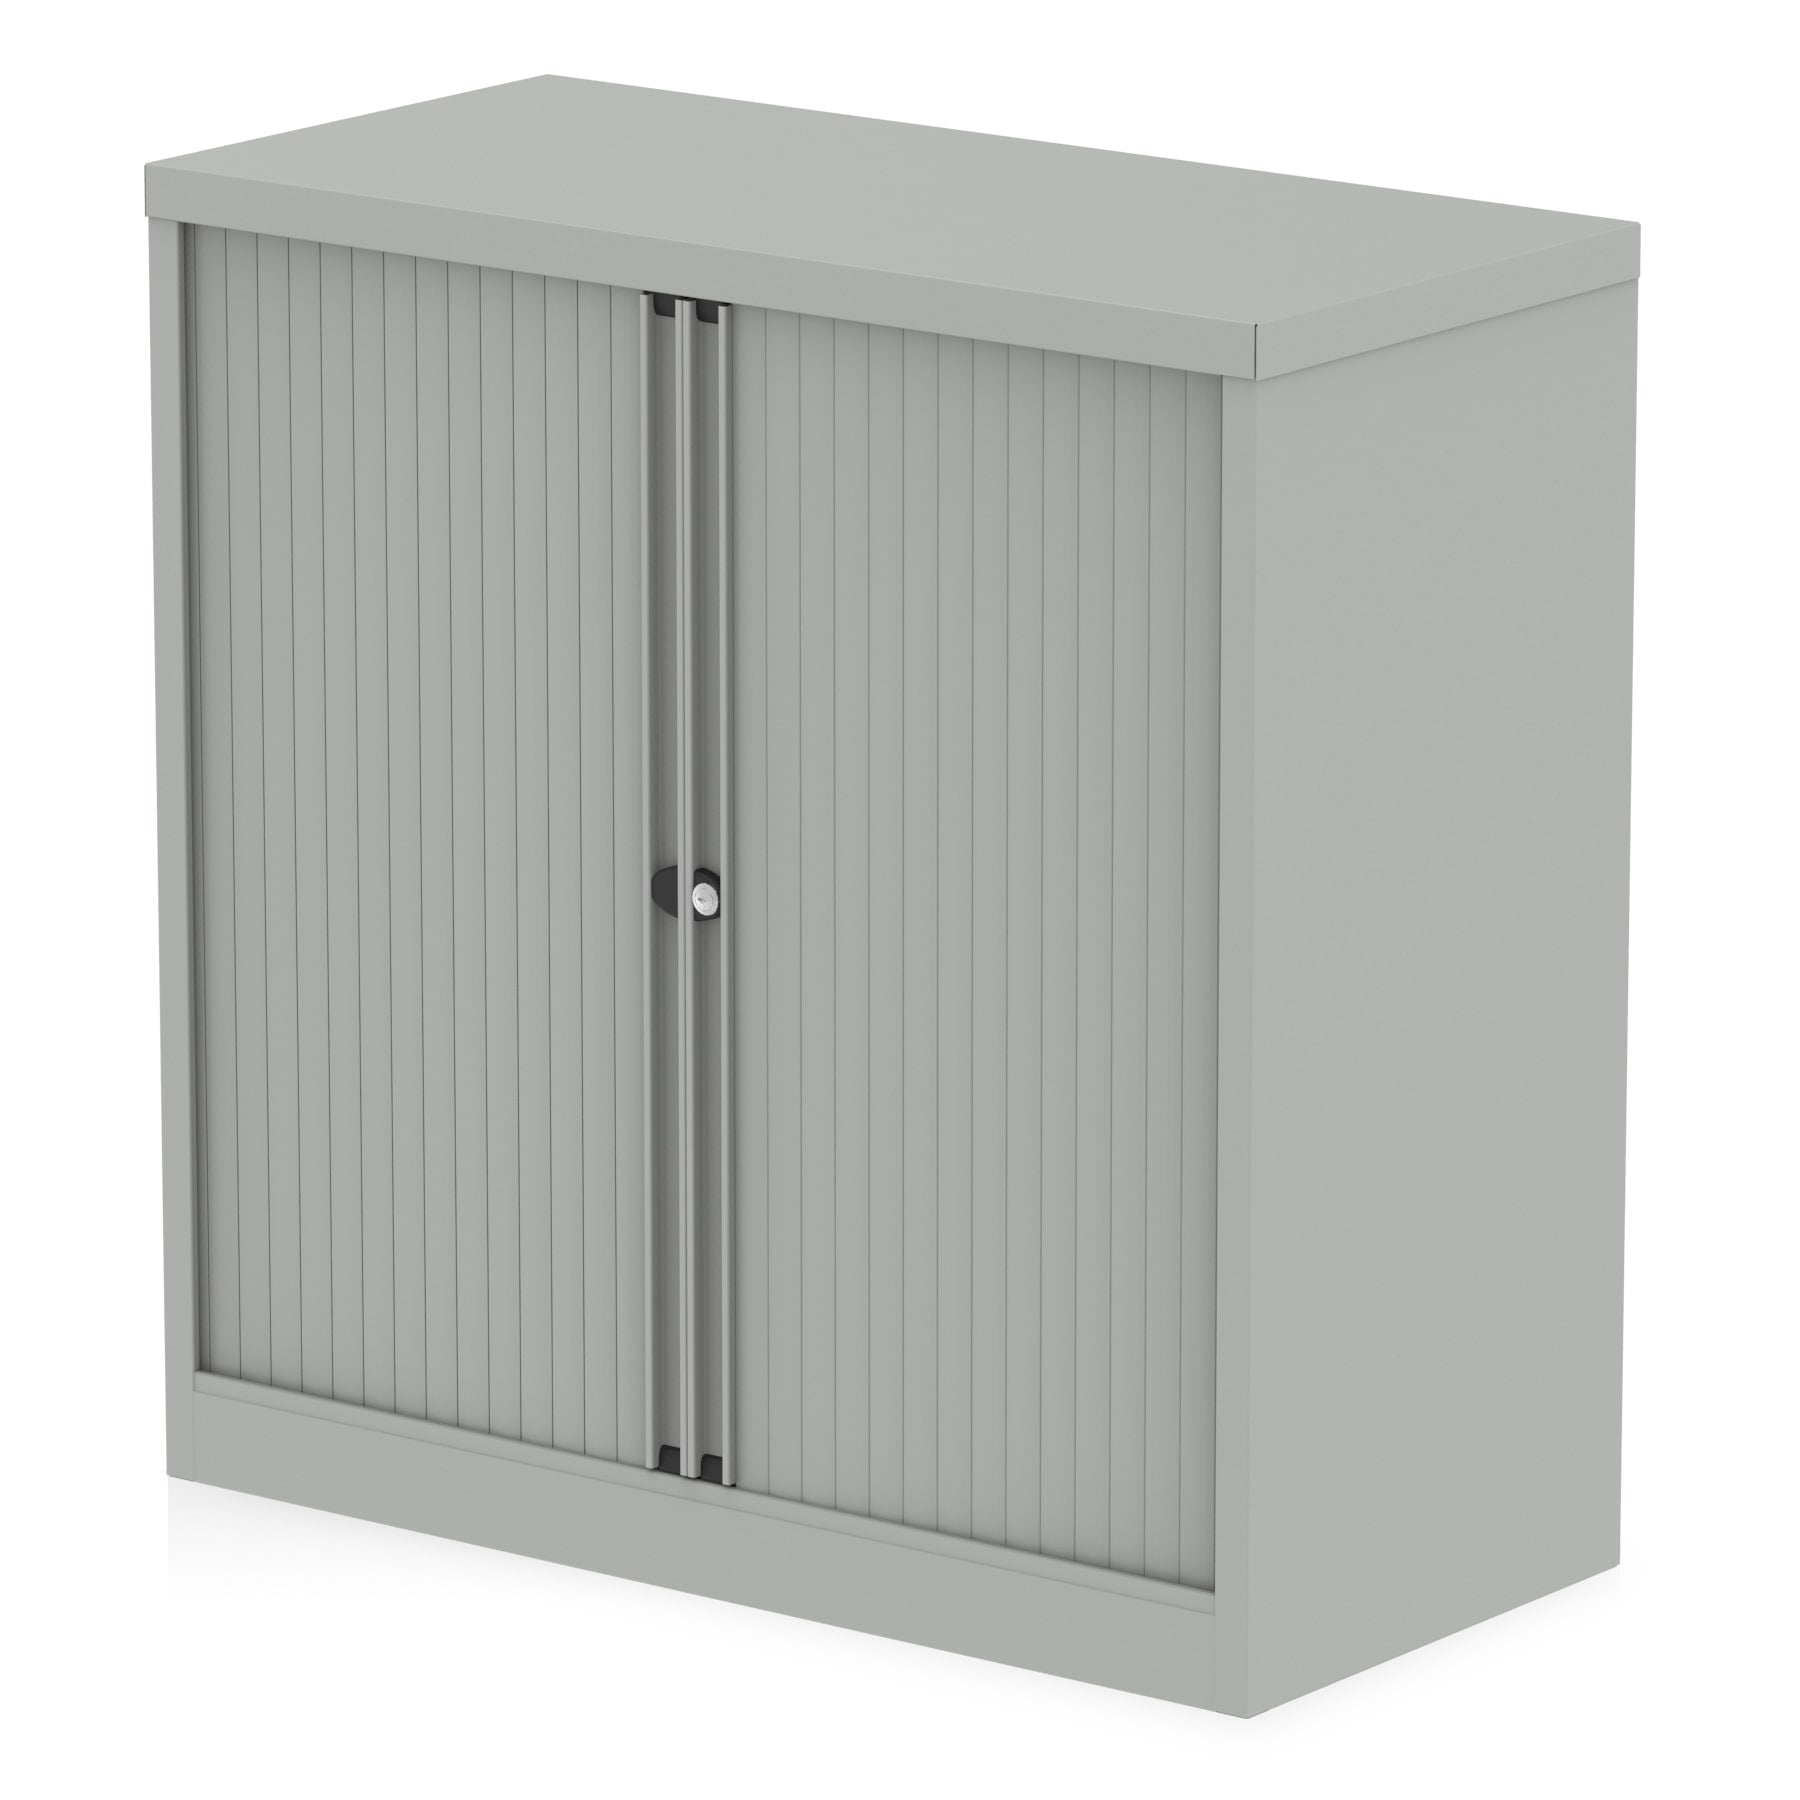 Qube by Bisley Tambour Cupboard (Available in 2 Sizes)